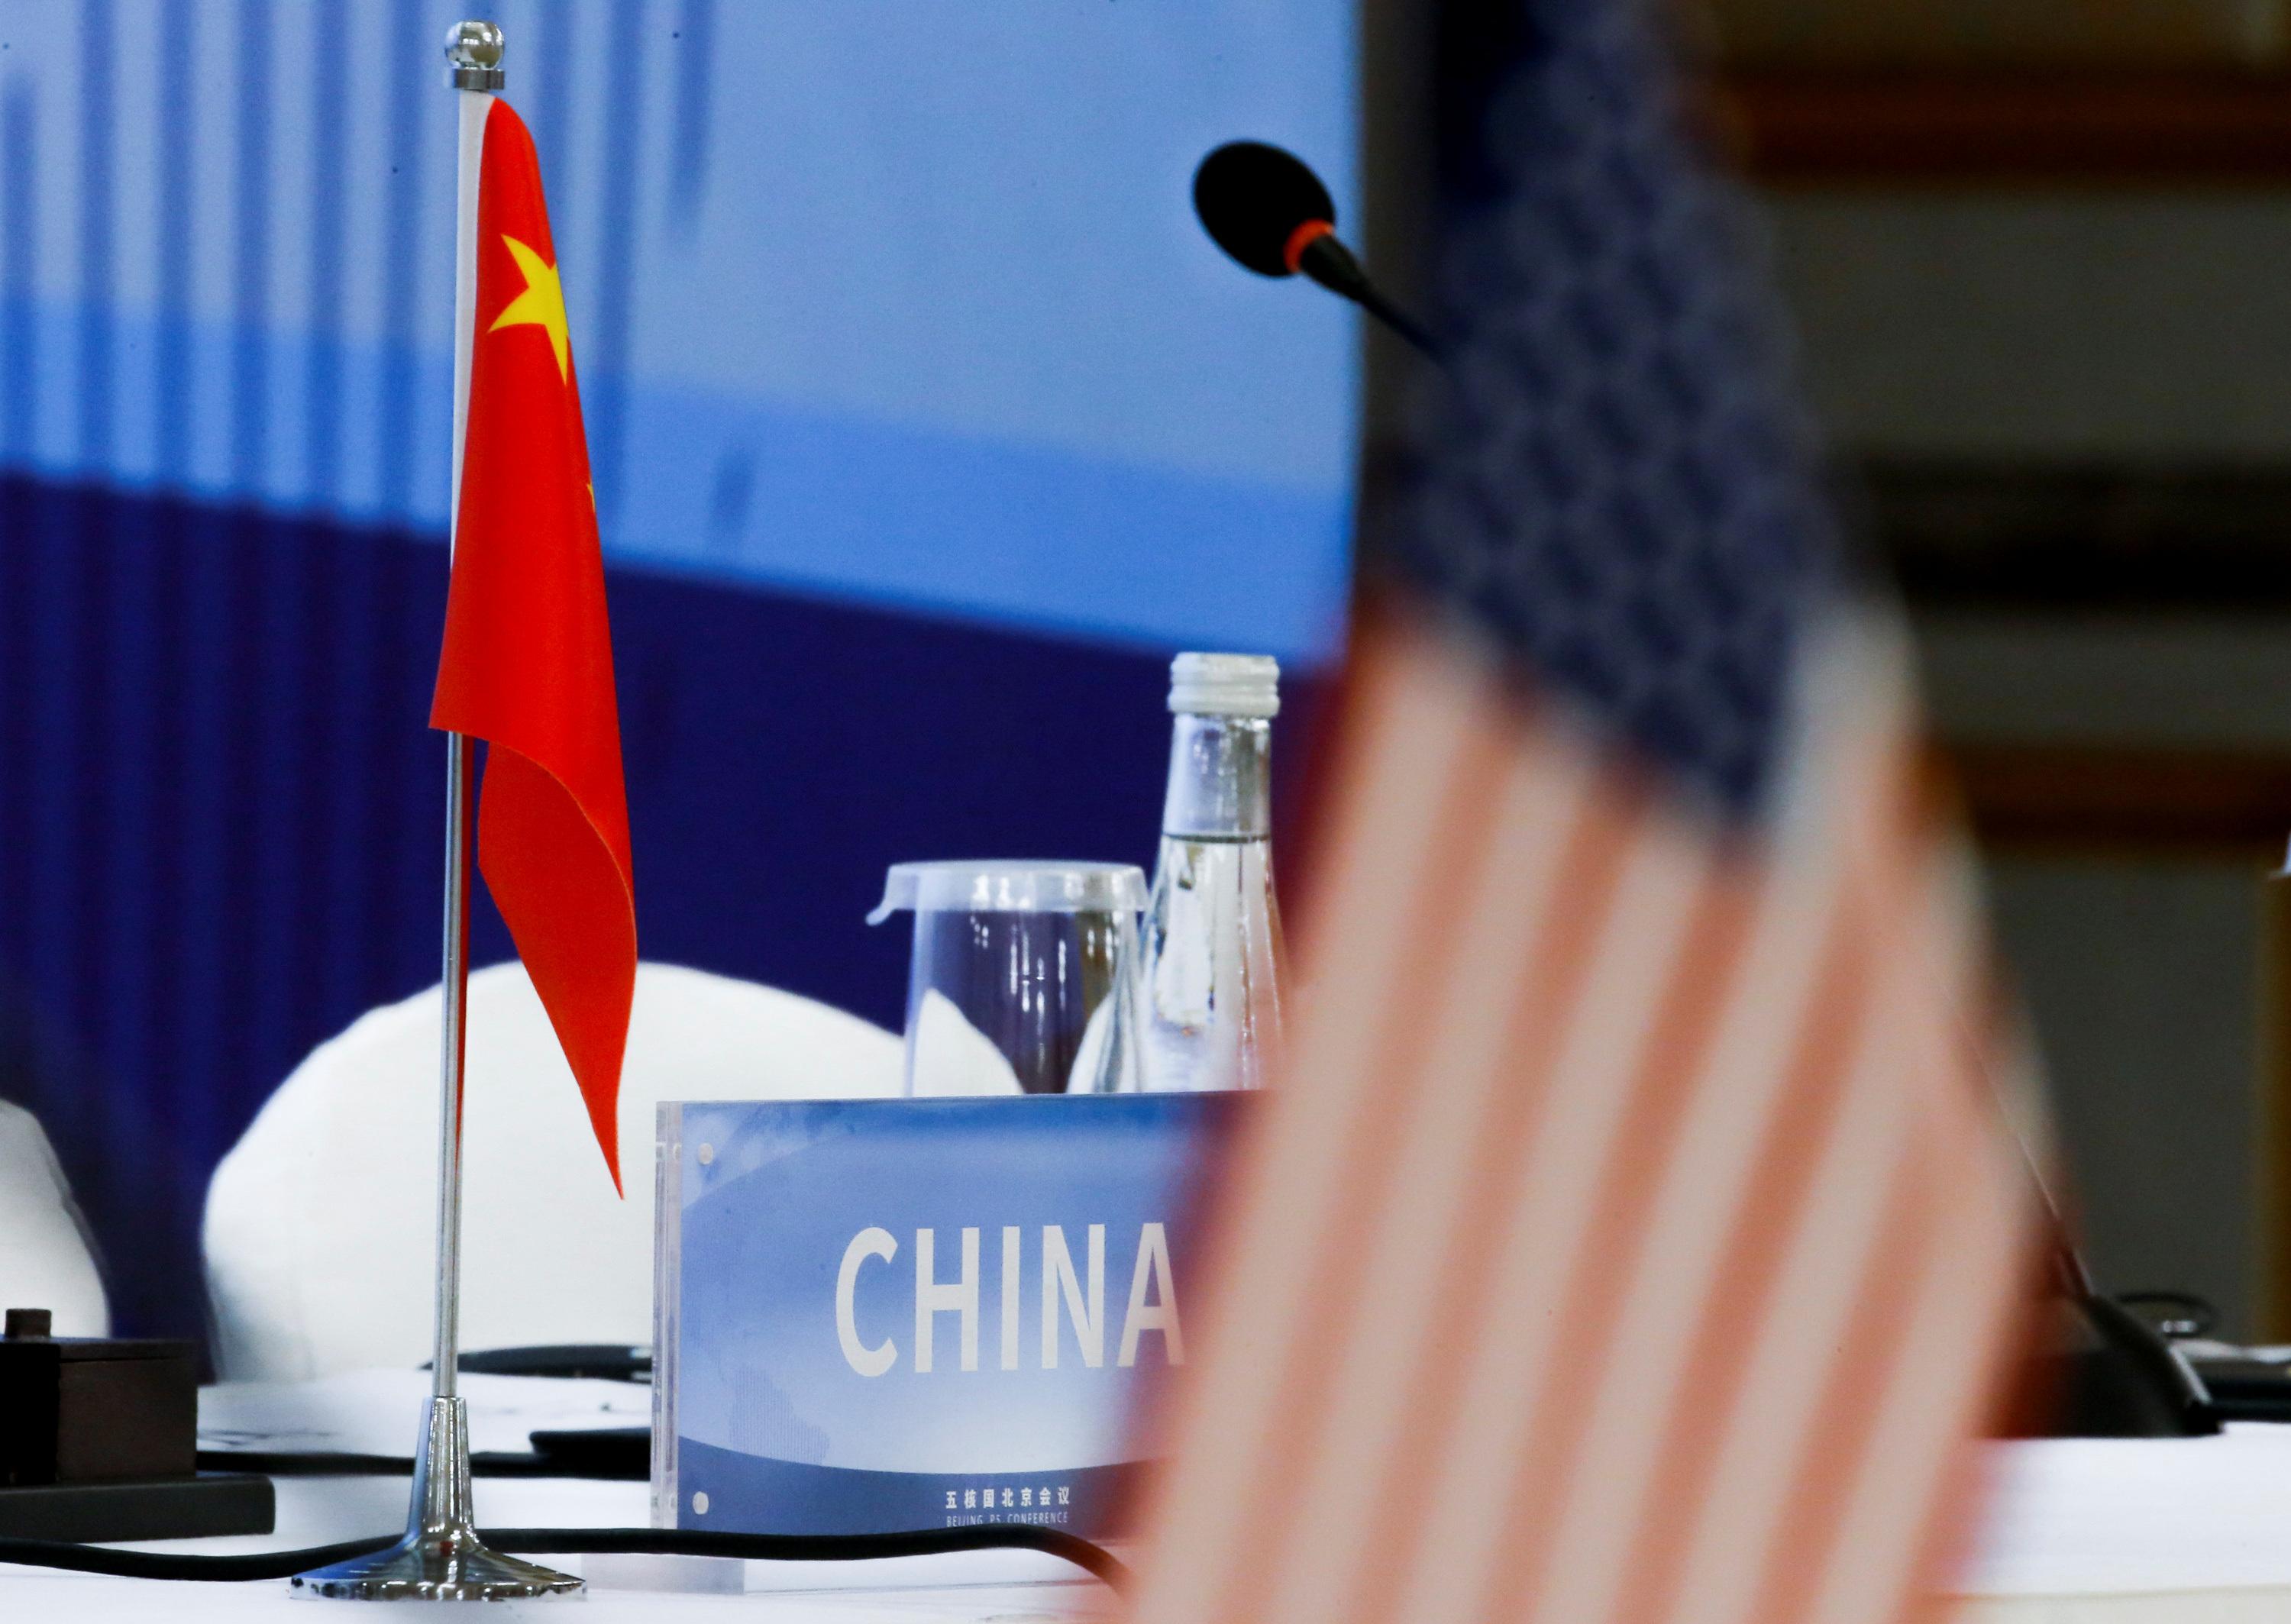 The Chinese and U.S. national flags are seen before the start of a P5 NPT conference in Beijing